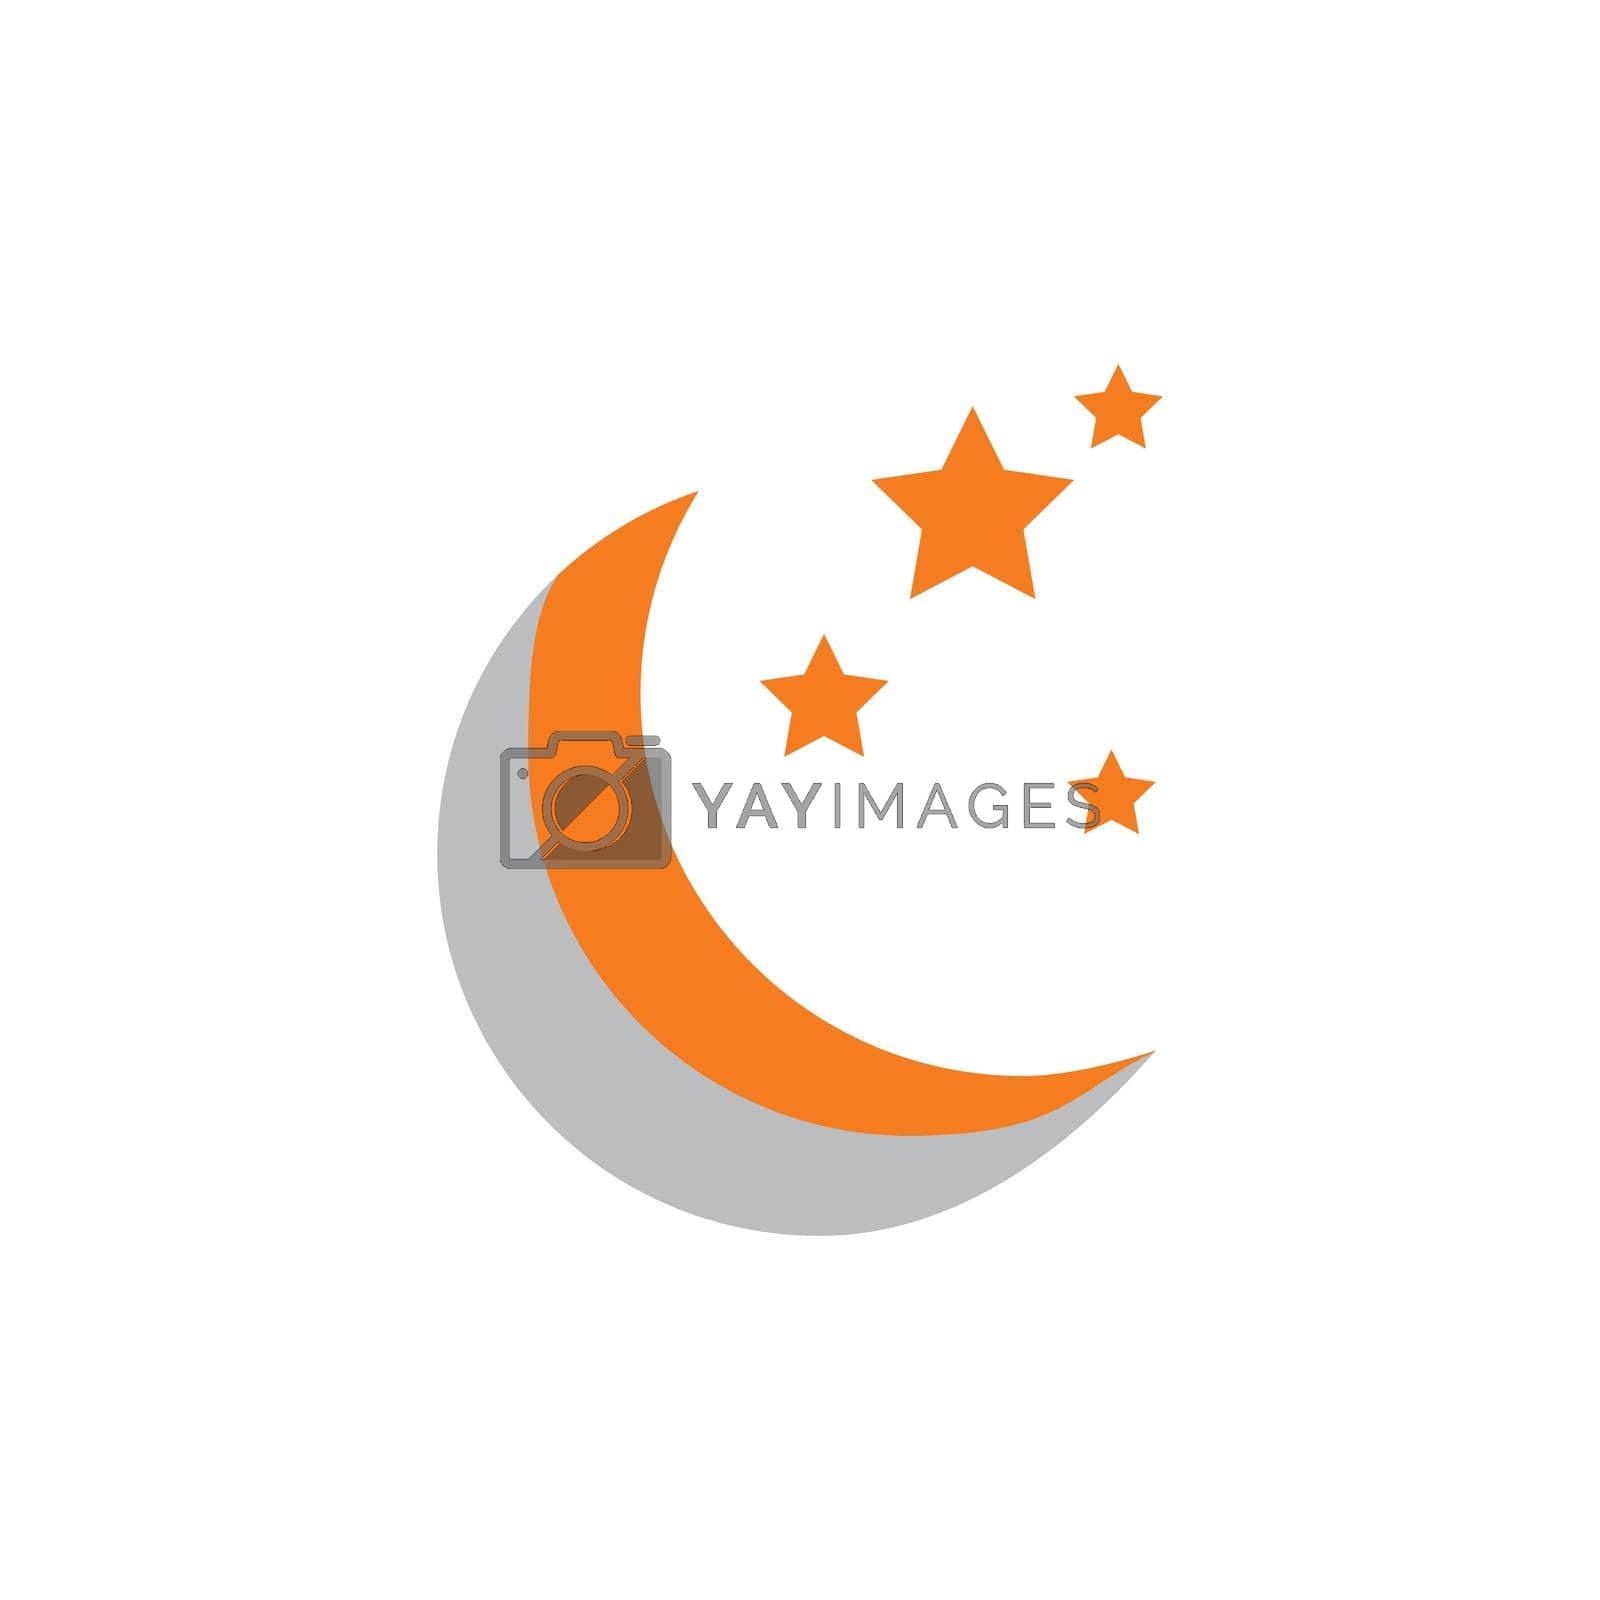 Royalty free image of Moon ilustration logo by awk